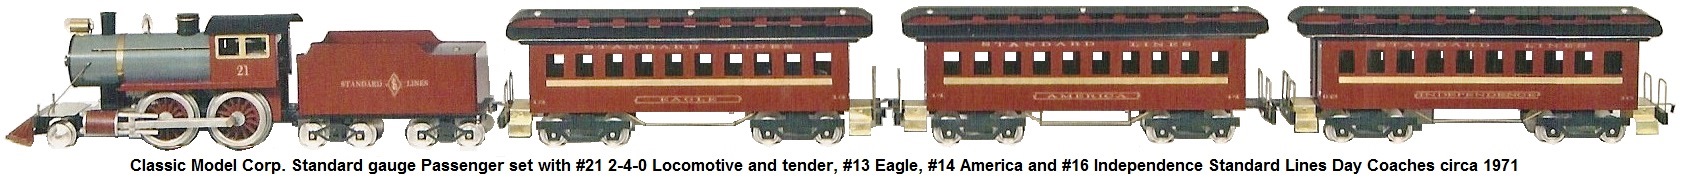 Classic Model Corp. Standard gauge #21 2-4-0 locomotive and tender with #13 Eagle, #14 America and #16 Independence Standard Lines Day coaches circa 1971